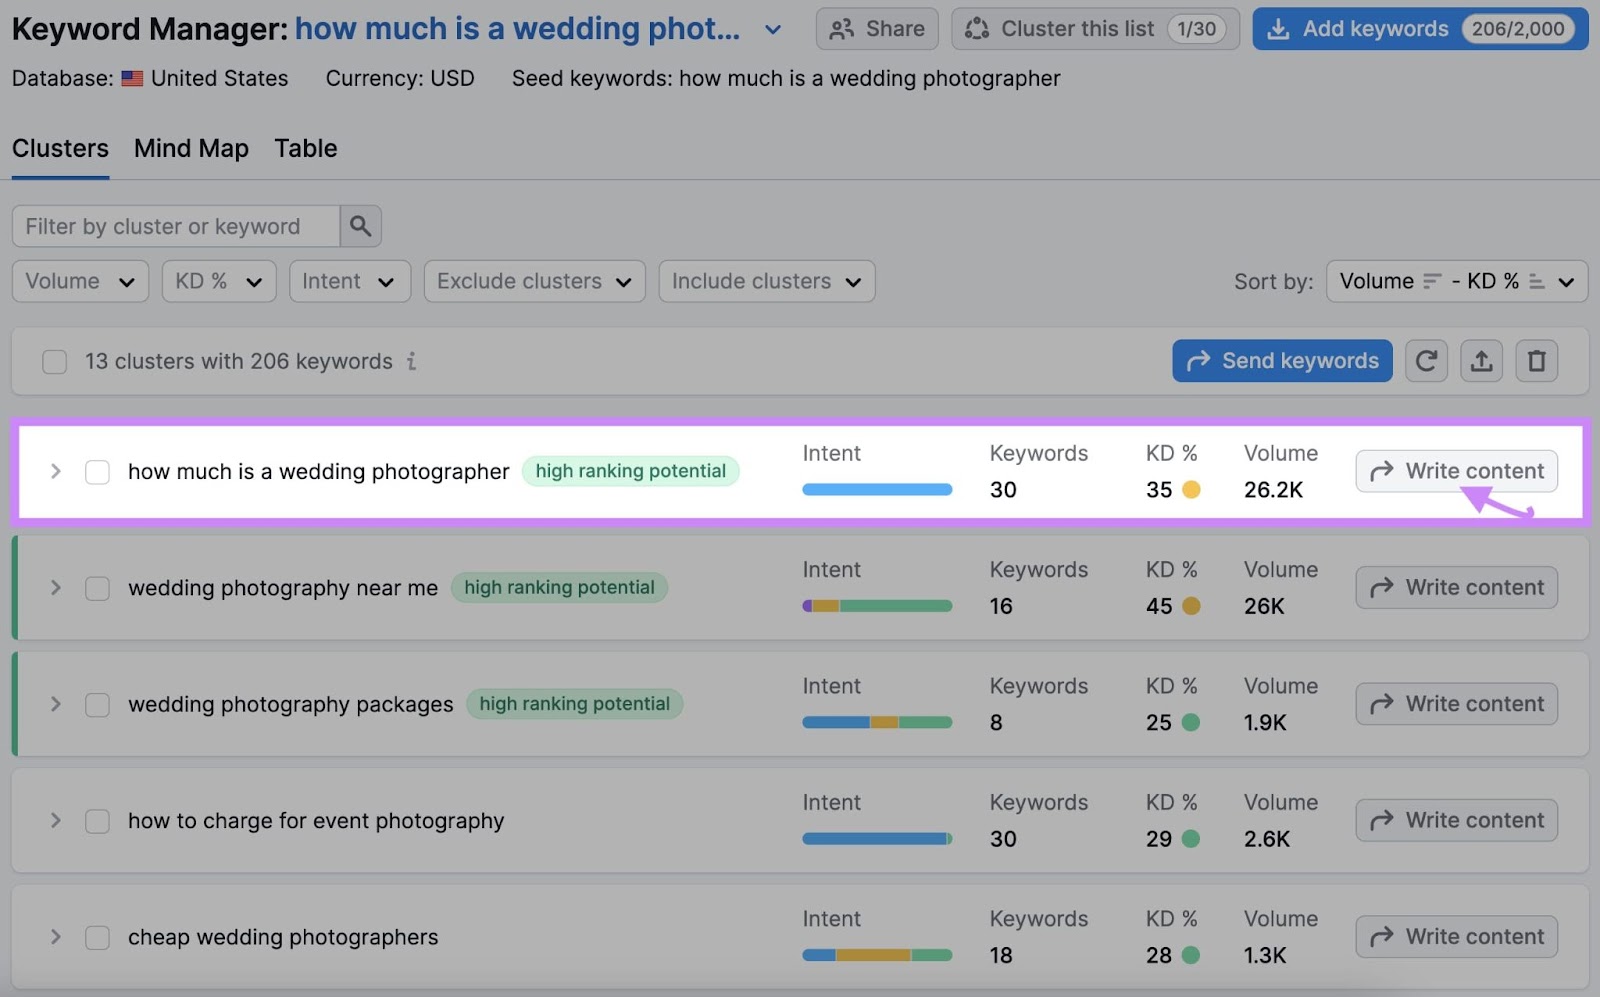 “Write content” button selected next to “how much is a wedding photographer" topic